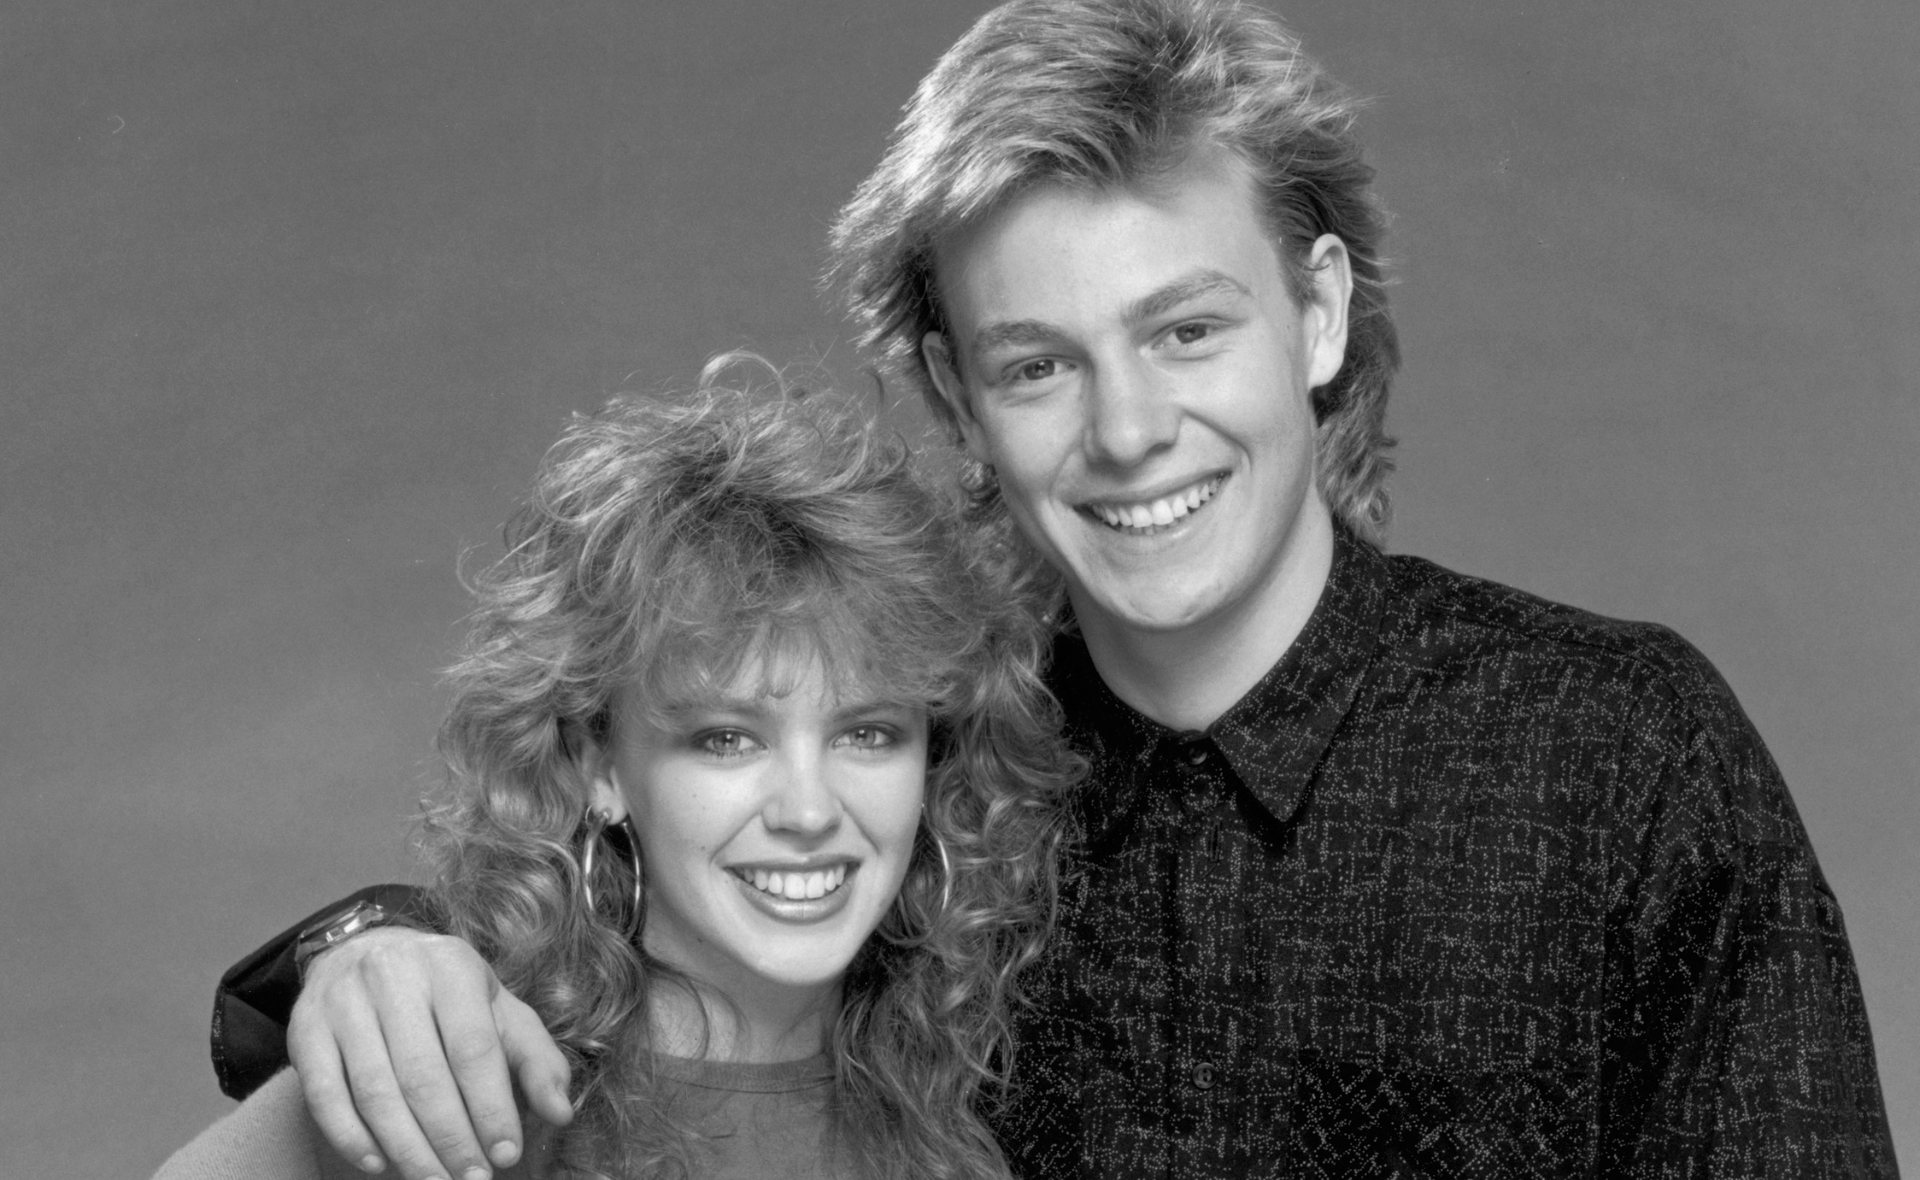 Chemistry like none other! Kylie Minogue and Jason Donovan reunite for a special occasion